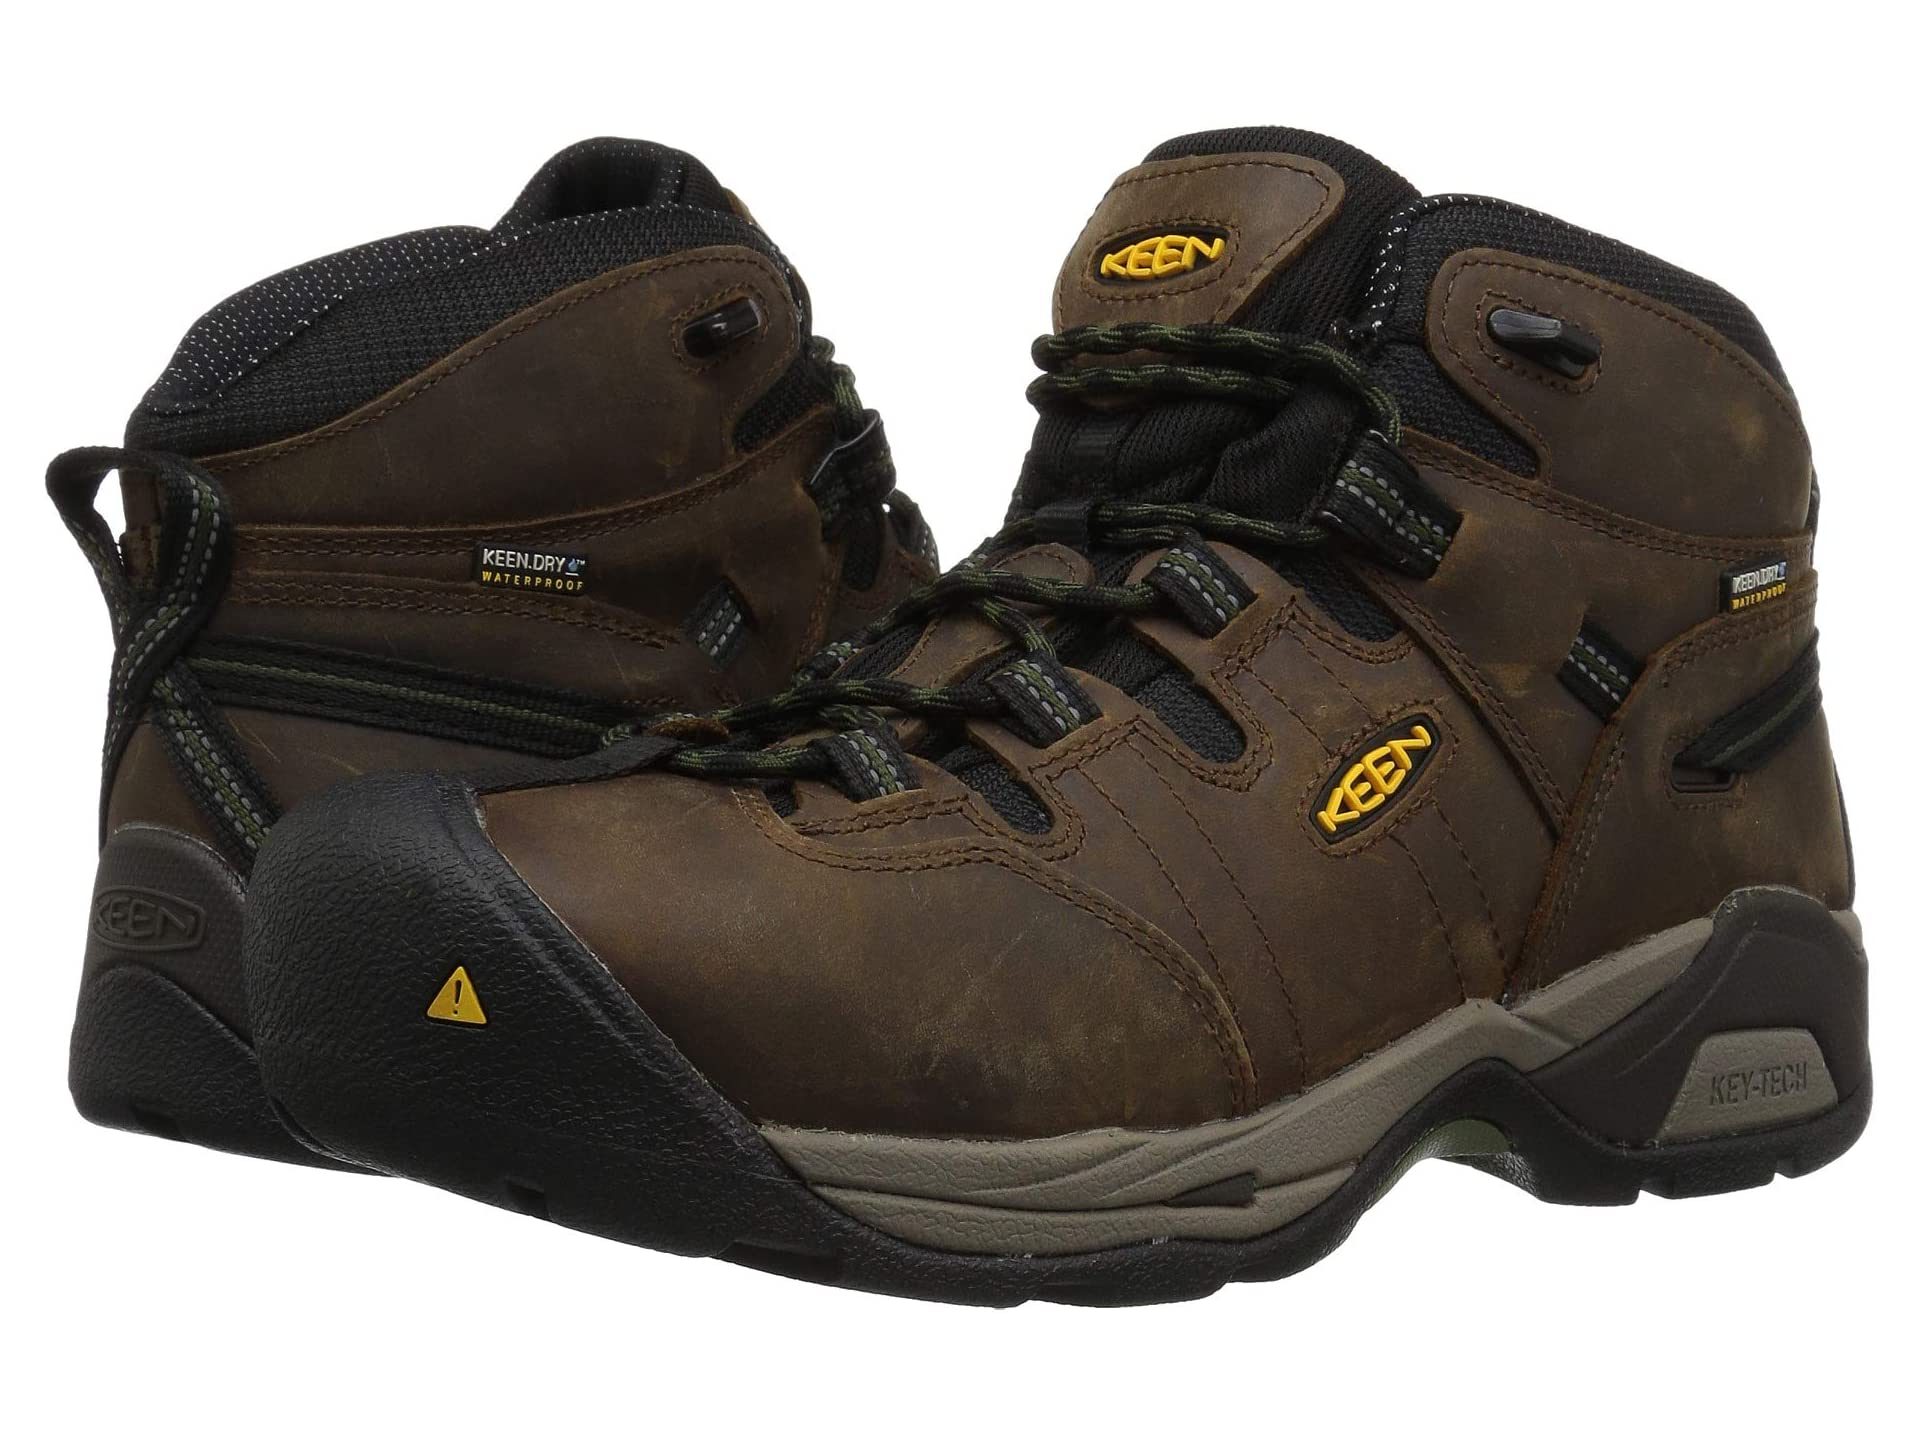 zappos mens work boots